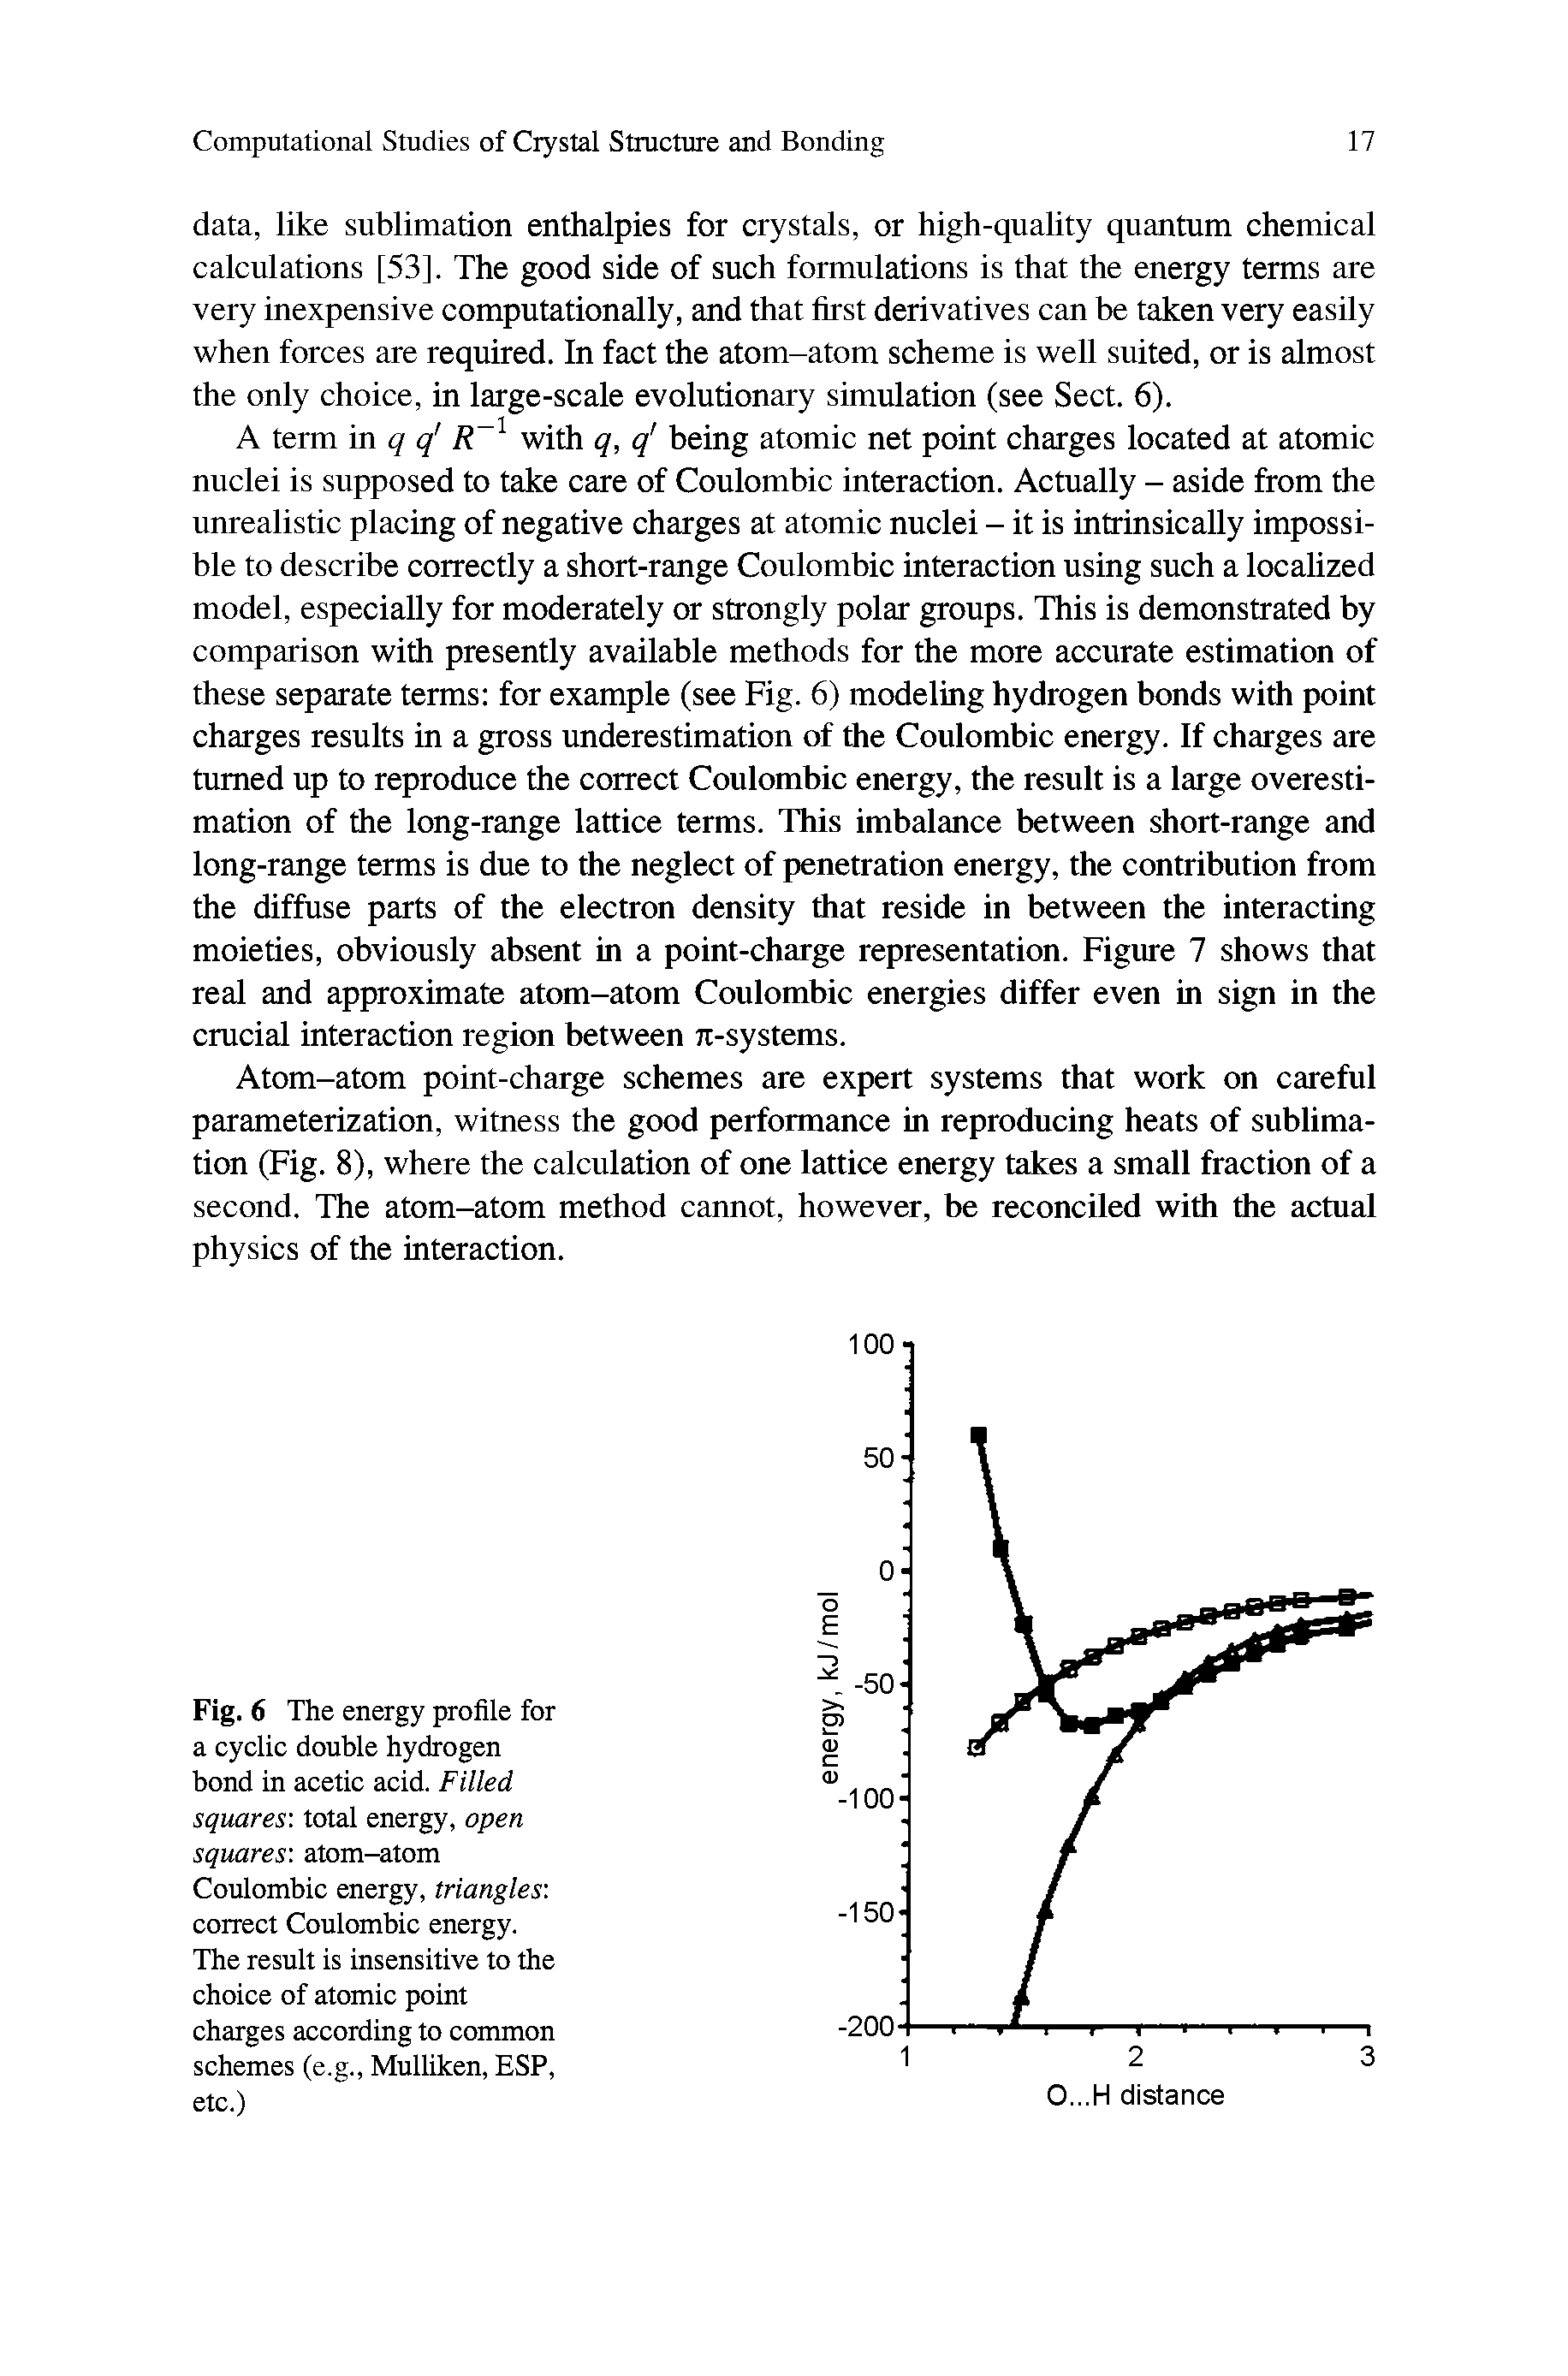 Fig. 6 The energy profile for a cyclic double hydrogen bond in acetic acid. Filled squares, total energy, open squares, atom-atom Coulombic energy, triangles. correct Coulombic energy. The result is insensitive to the choice of atomic point charges according to common schemes (e.g., Muliiken, ESP, etc.)...